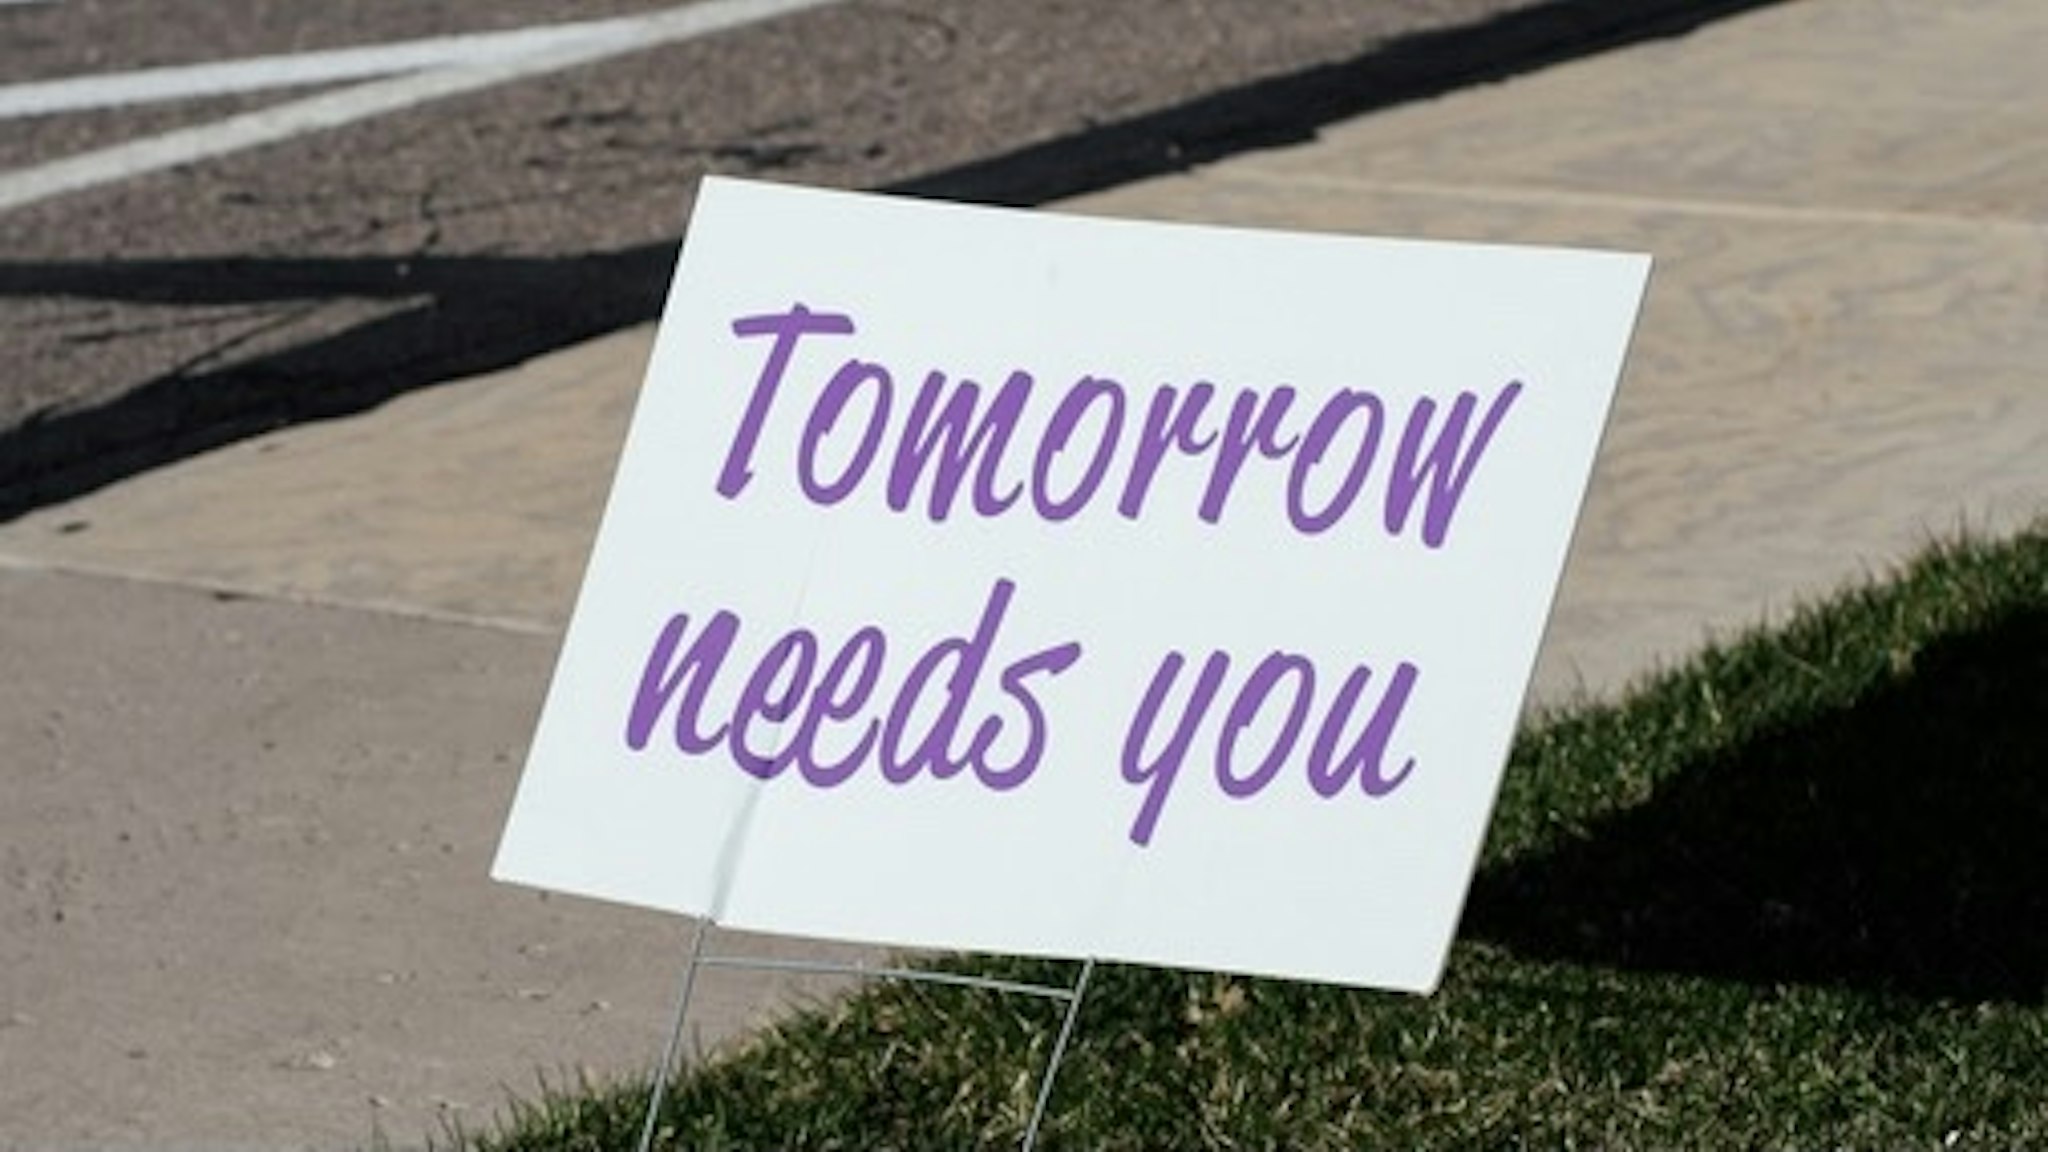 Sign that reads "Tomorrow needs you" placed by a sidewalk. - stock photo